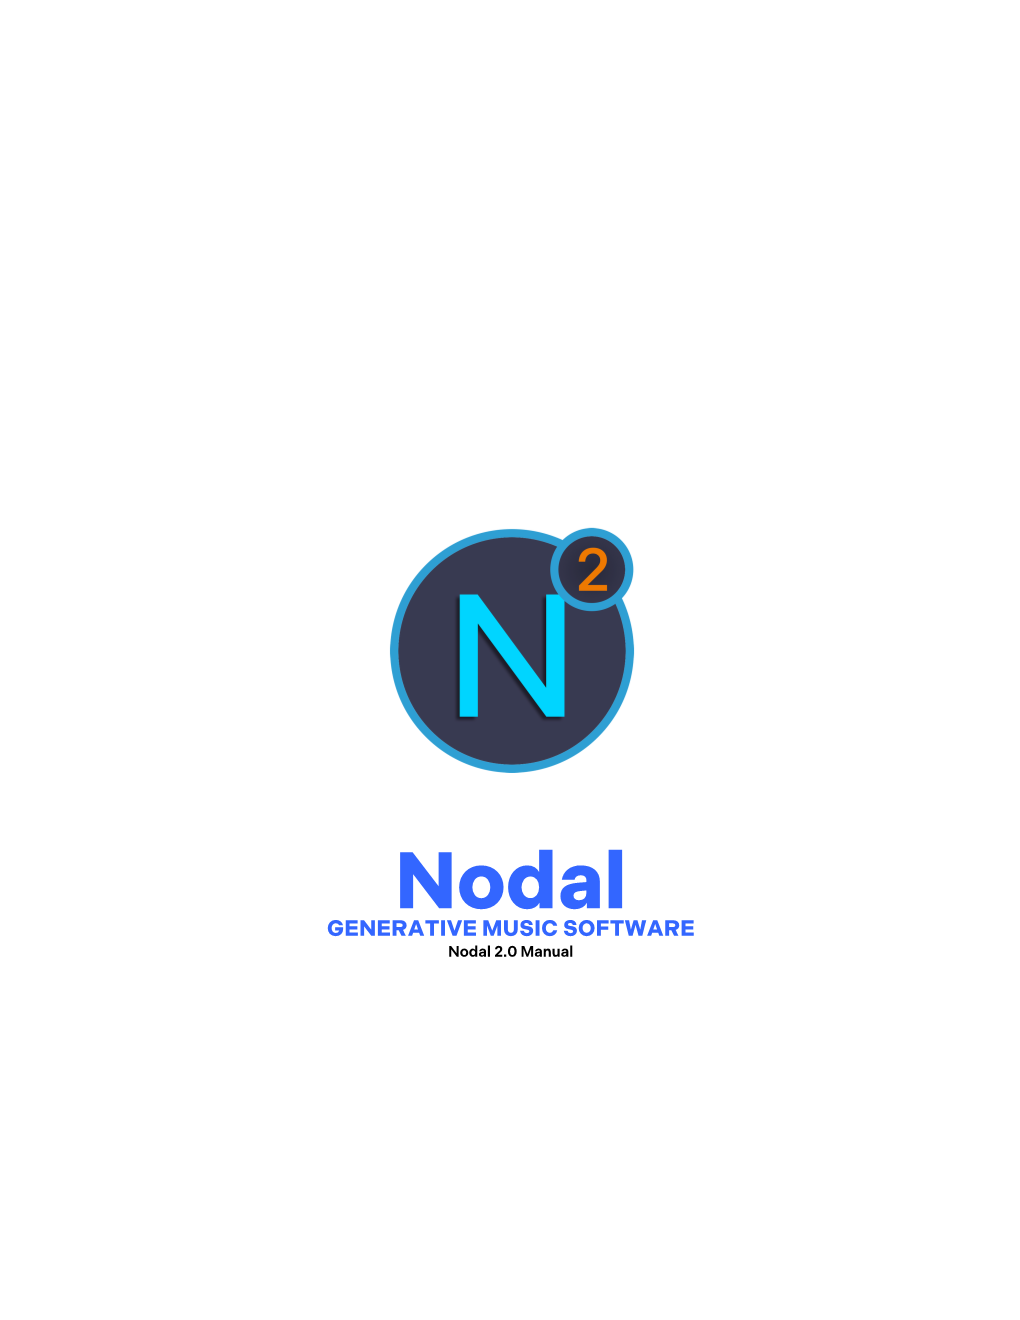 Nodal Manual Was Written by Changing Velocity and Duration